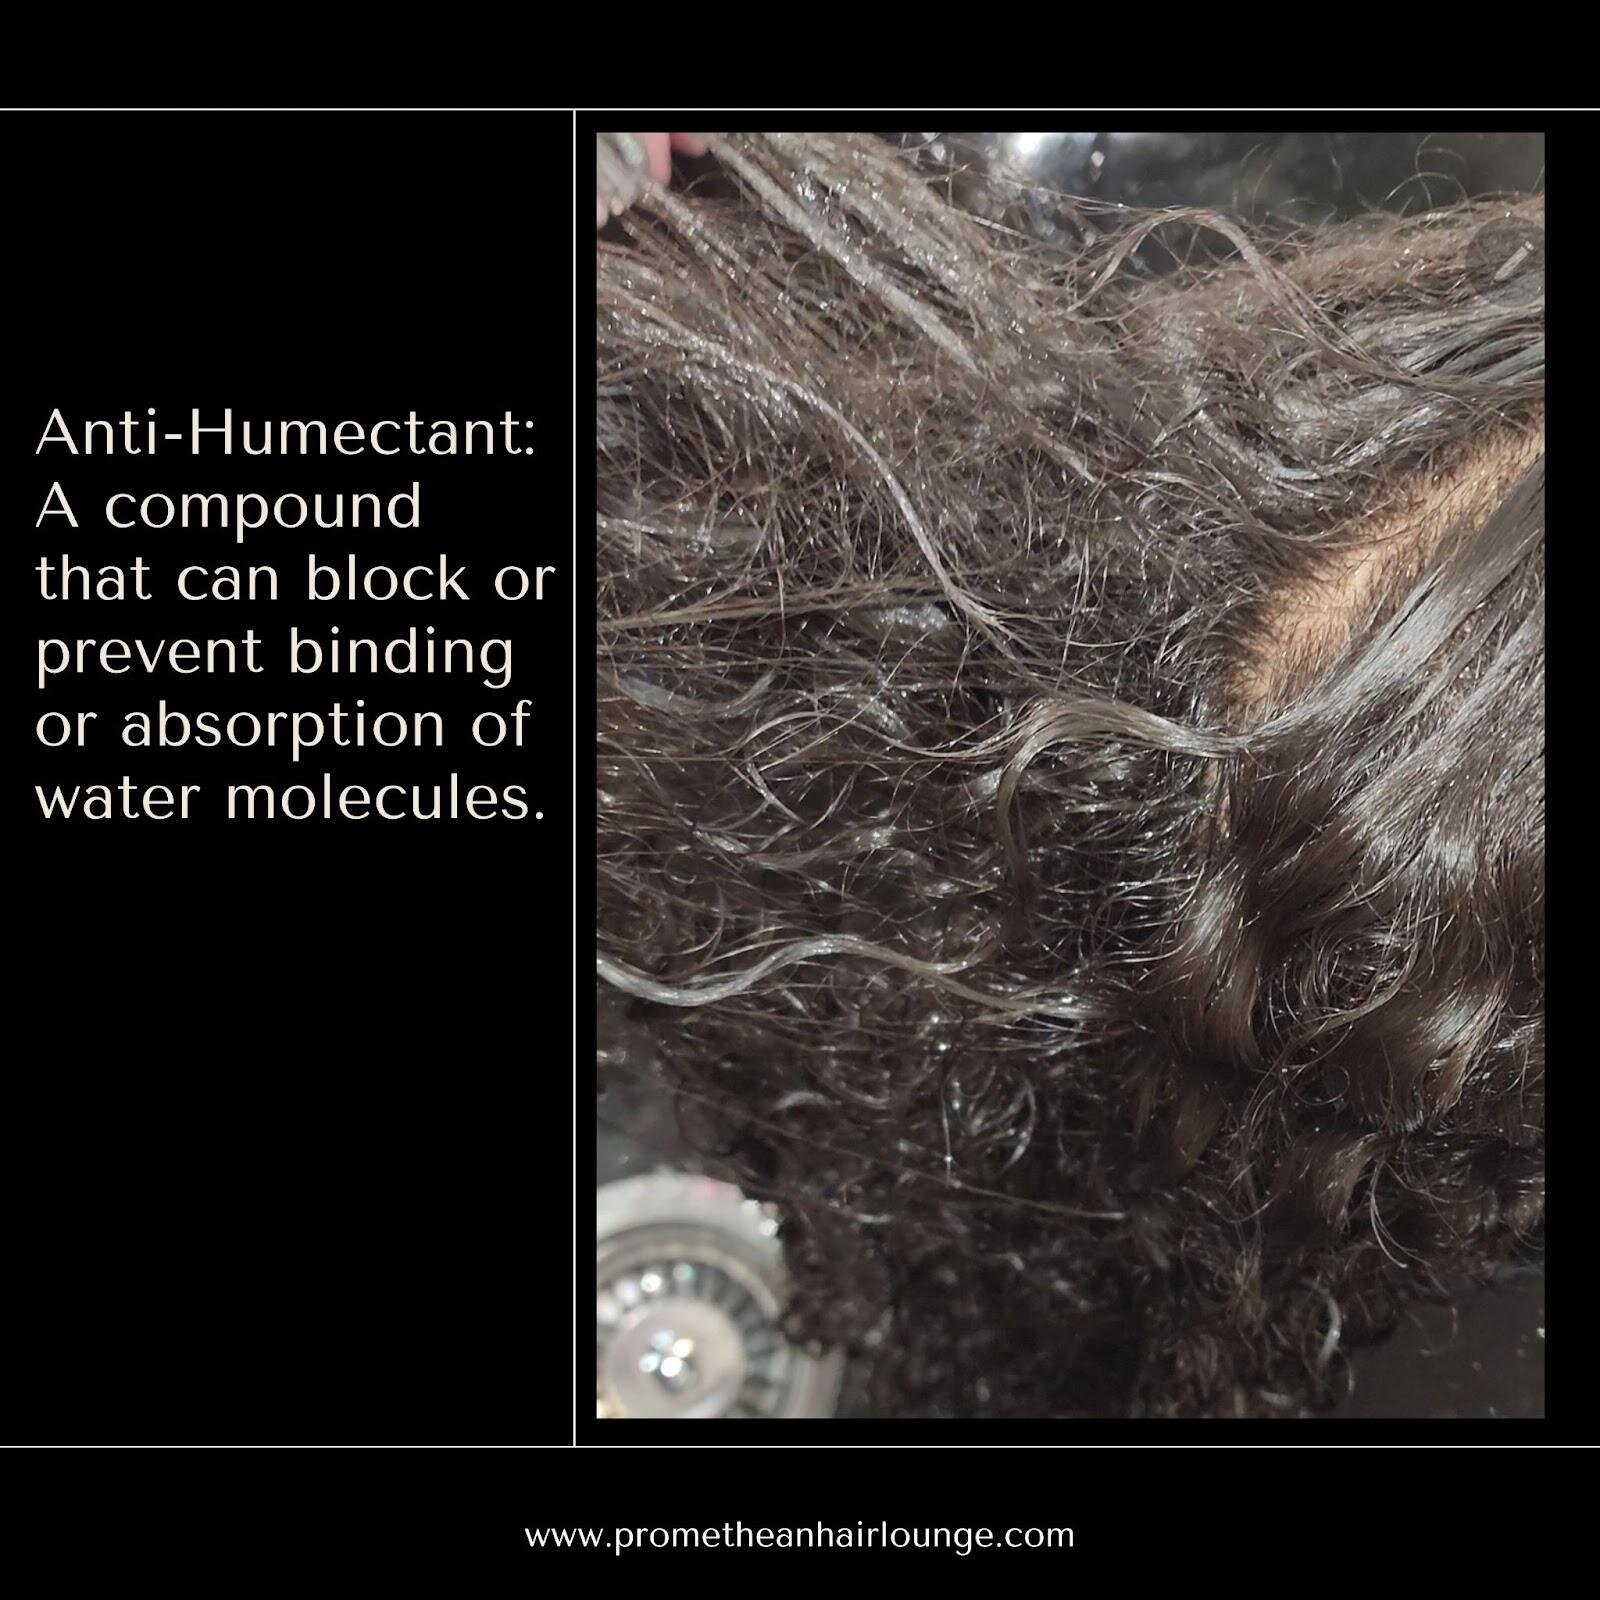 In terms of hair, anti-humectants prevent and repel water from entering the hair shaft. This gradually results in extreme dehydration, which produces tangles, curly hair that is mis shaped, and eventually breakage.
.
Examples of ingredients commonly 